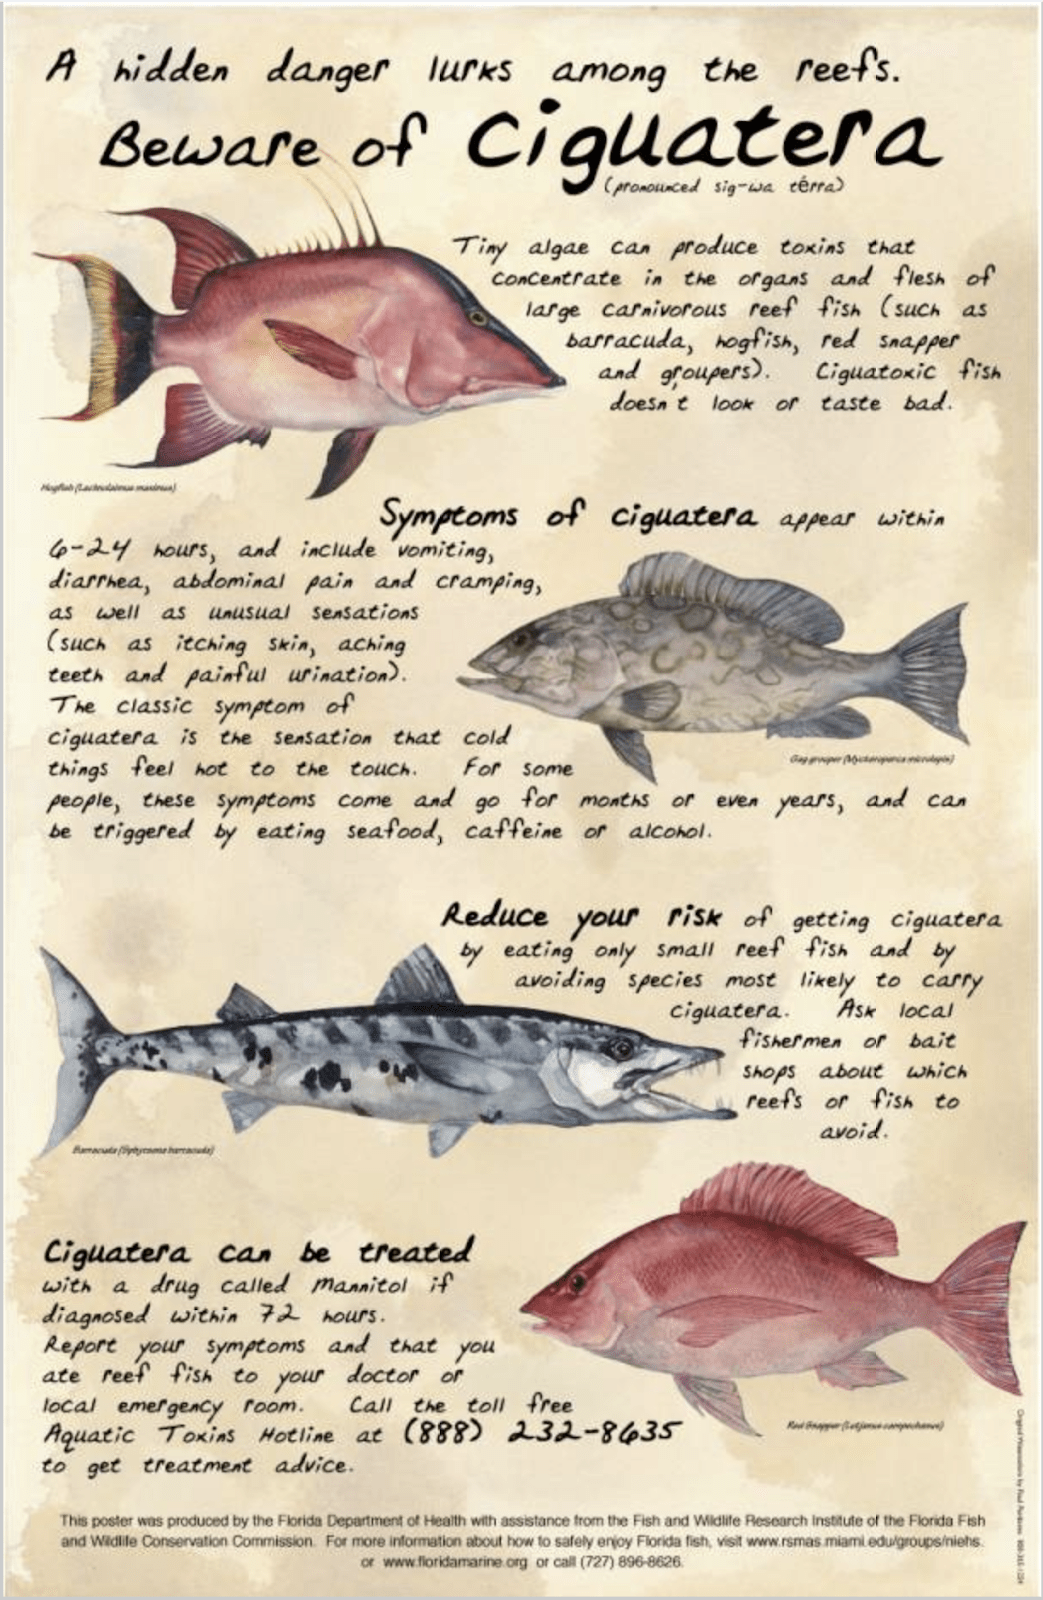 Informational poster from Florida’s Department of Health about ciguatera fish poisoning.